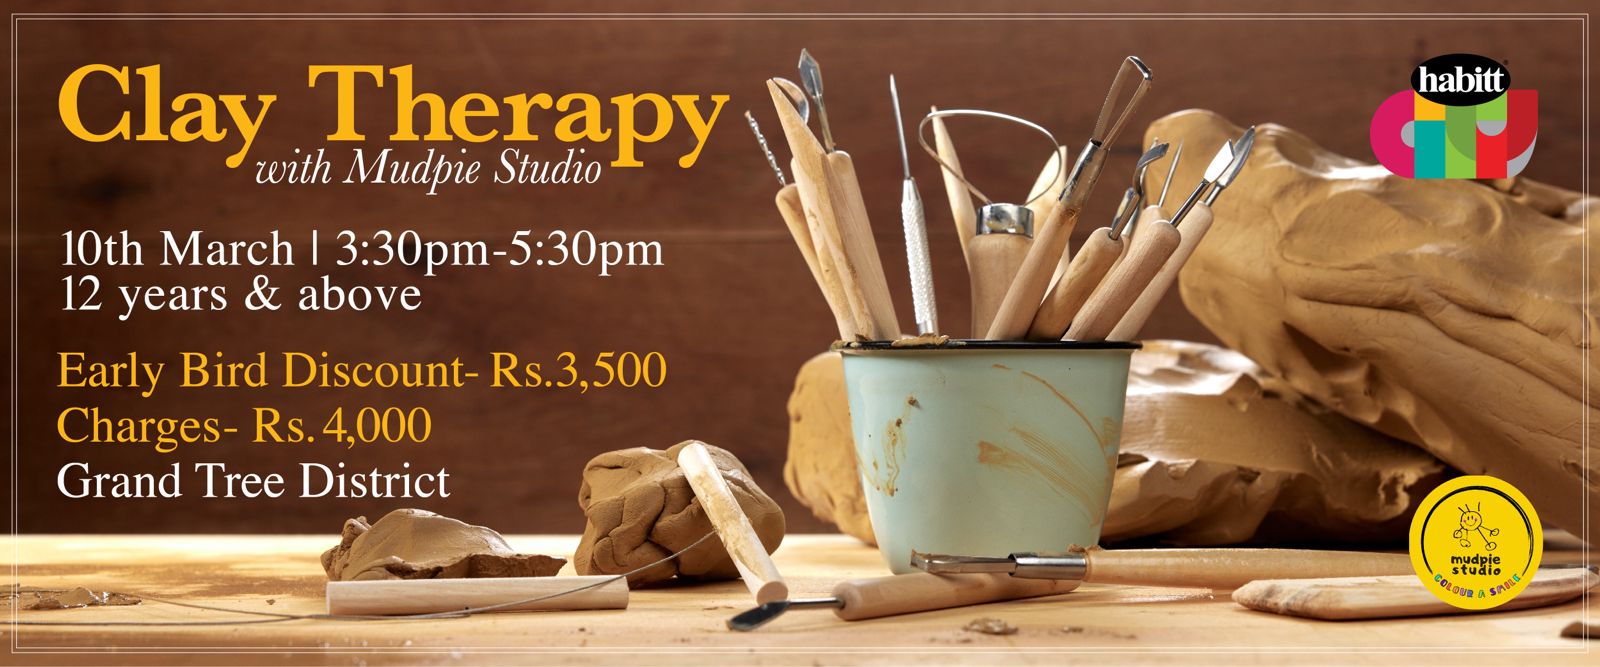 CLAY THERAPY WORKSHOP